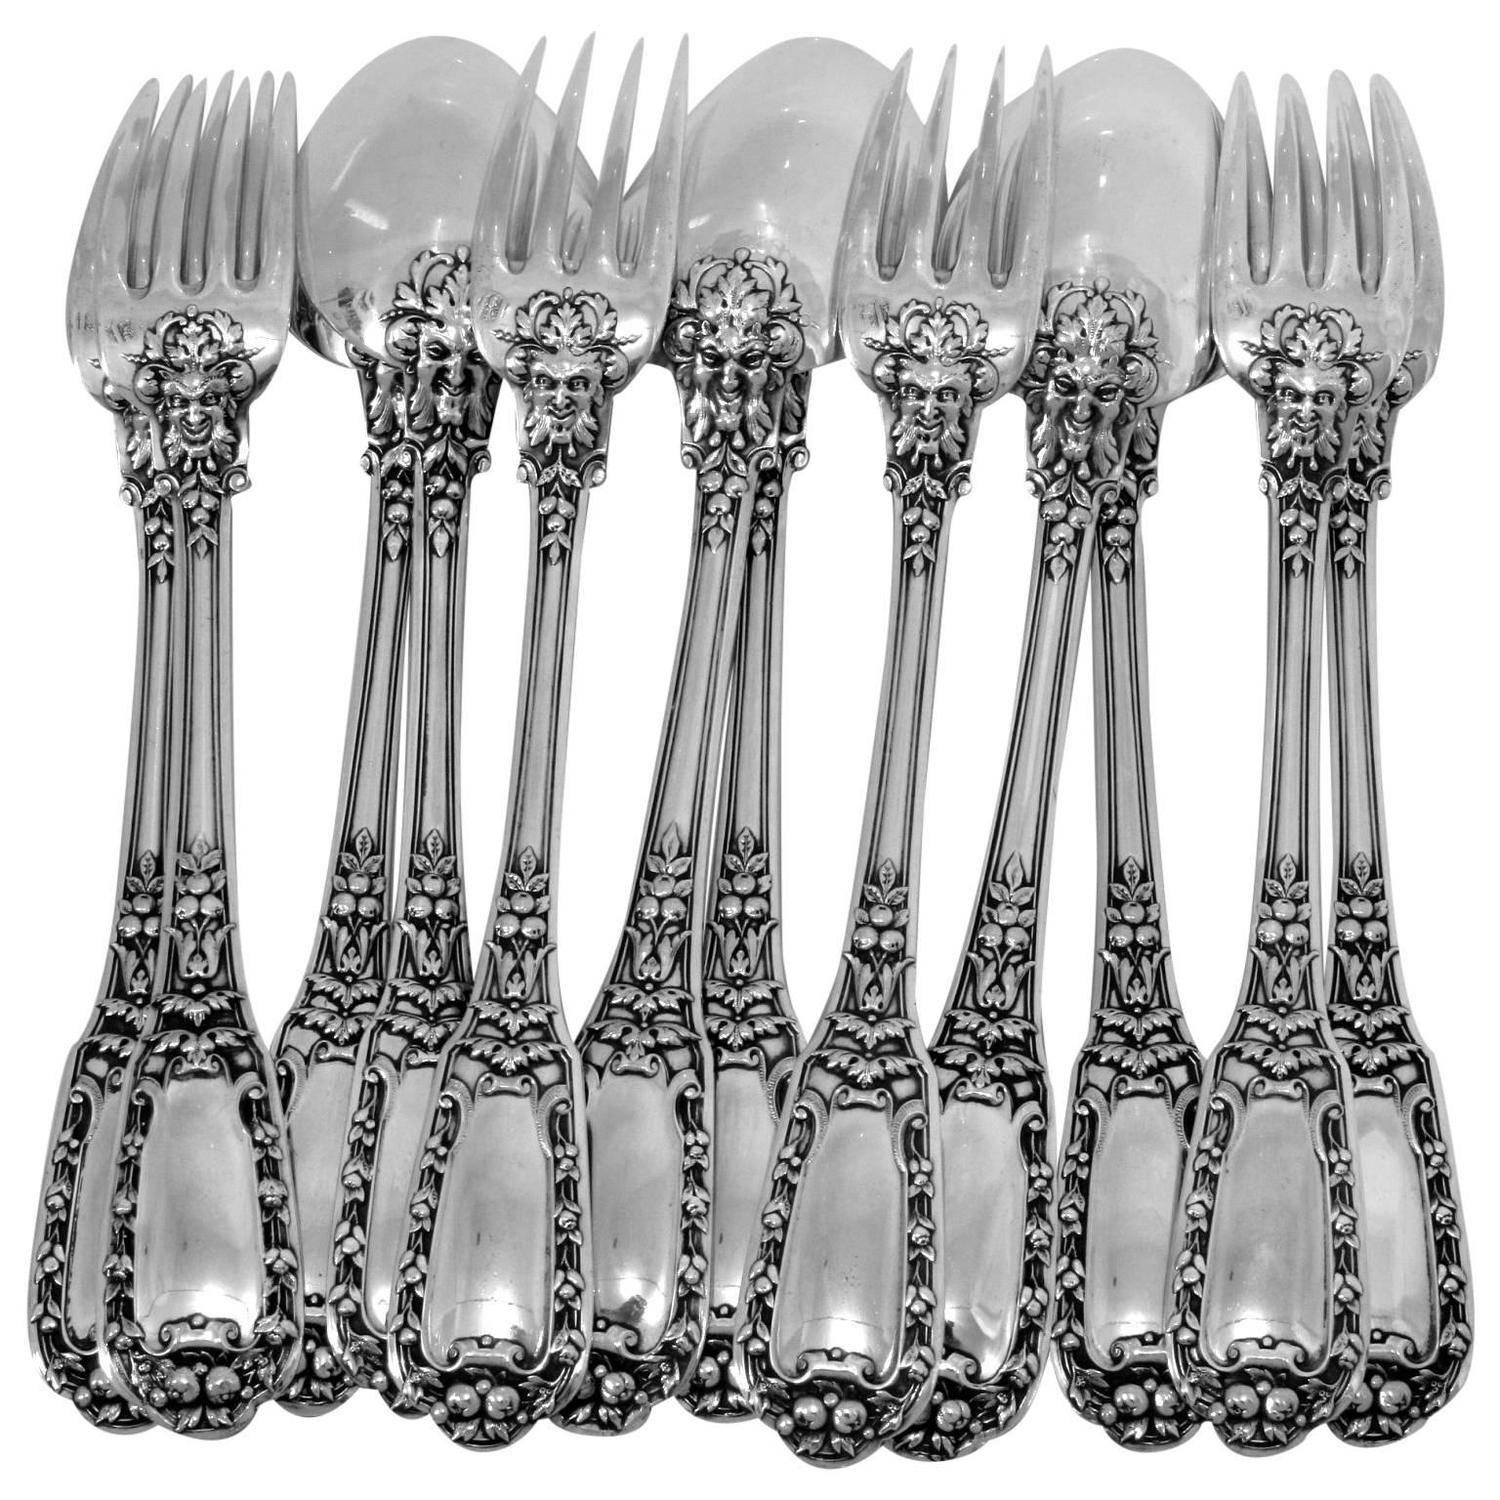 Soufflot Gorgeous French Sterling Silver Dinner Flatware Set 12 Pc Mascarons